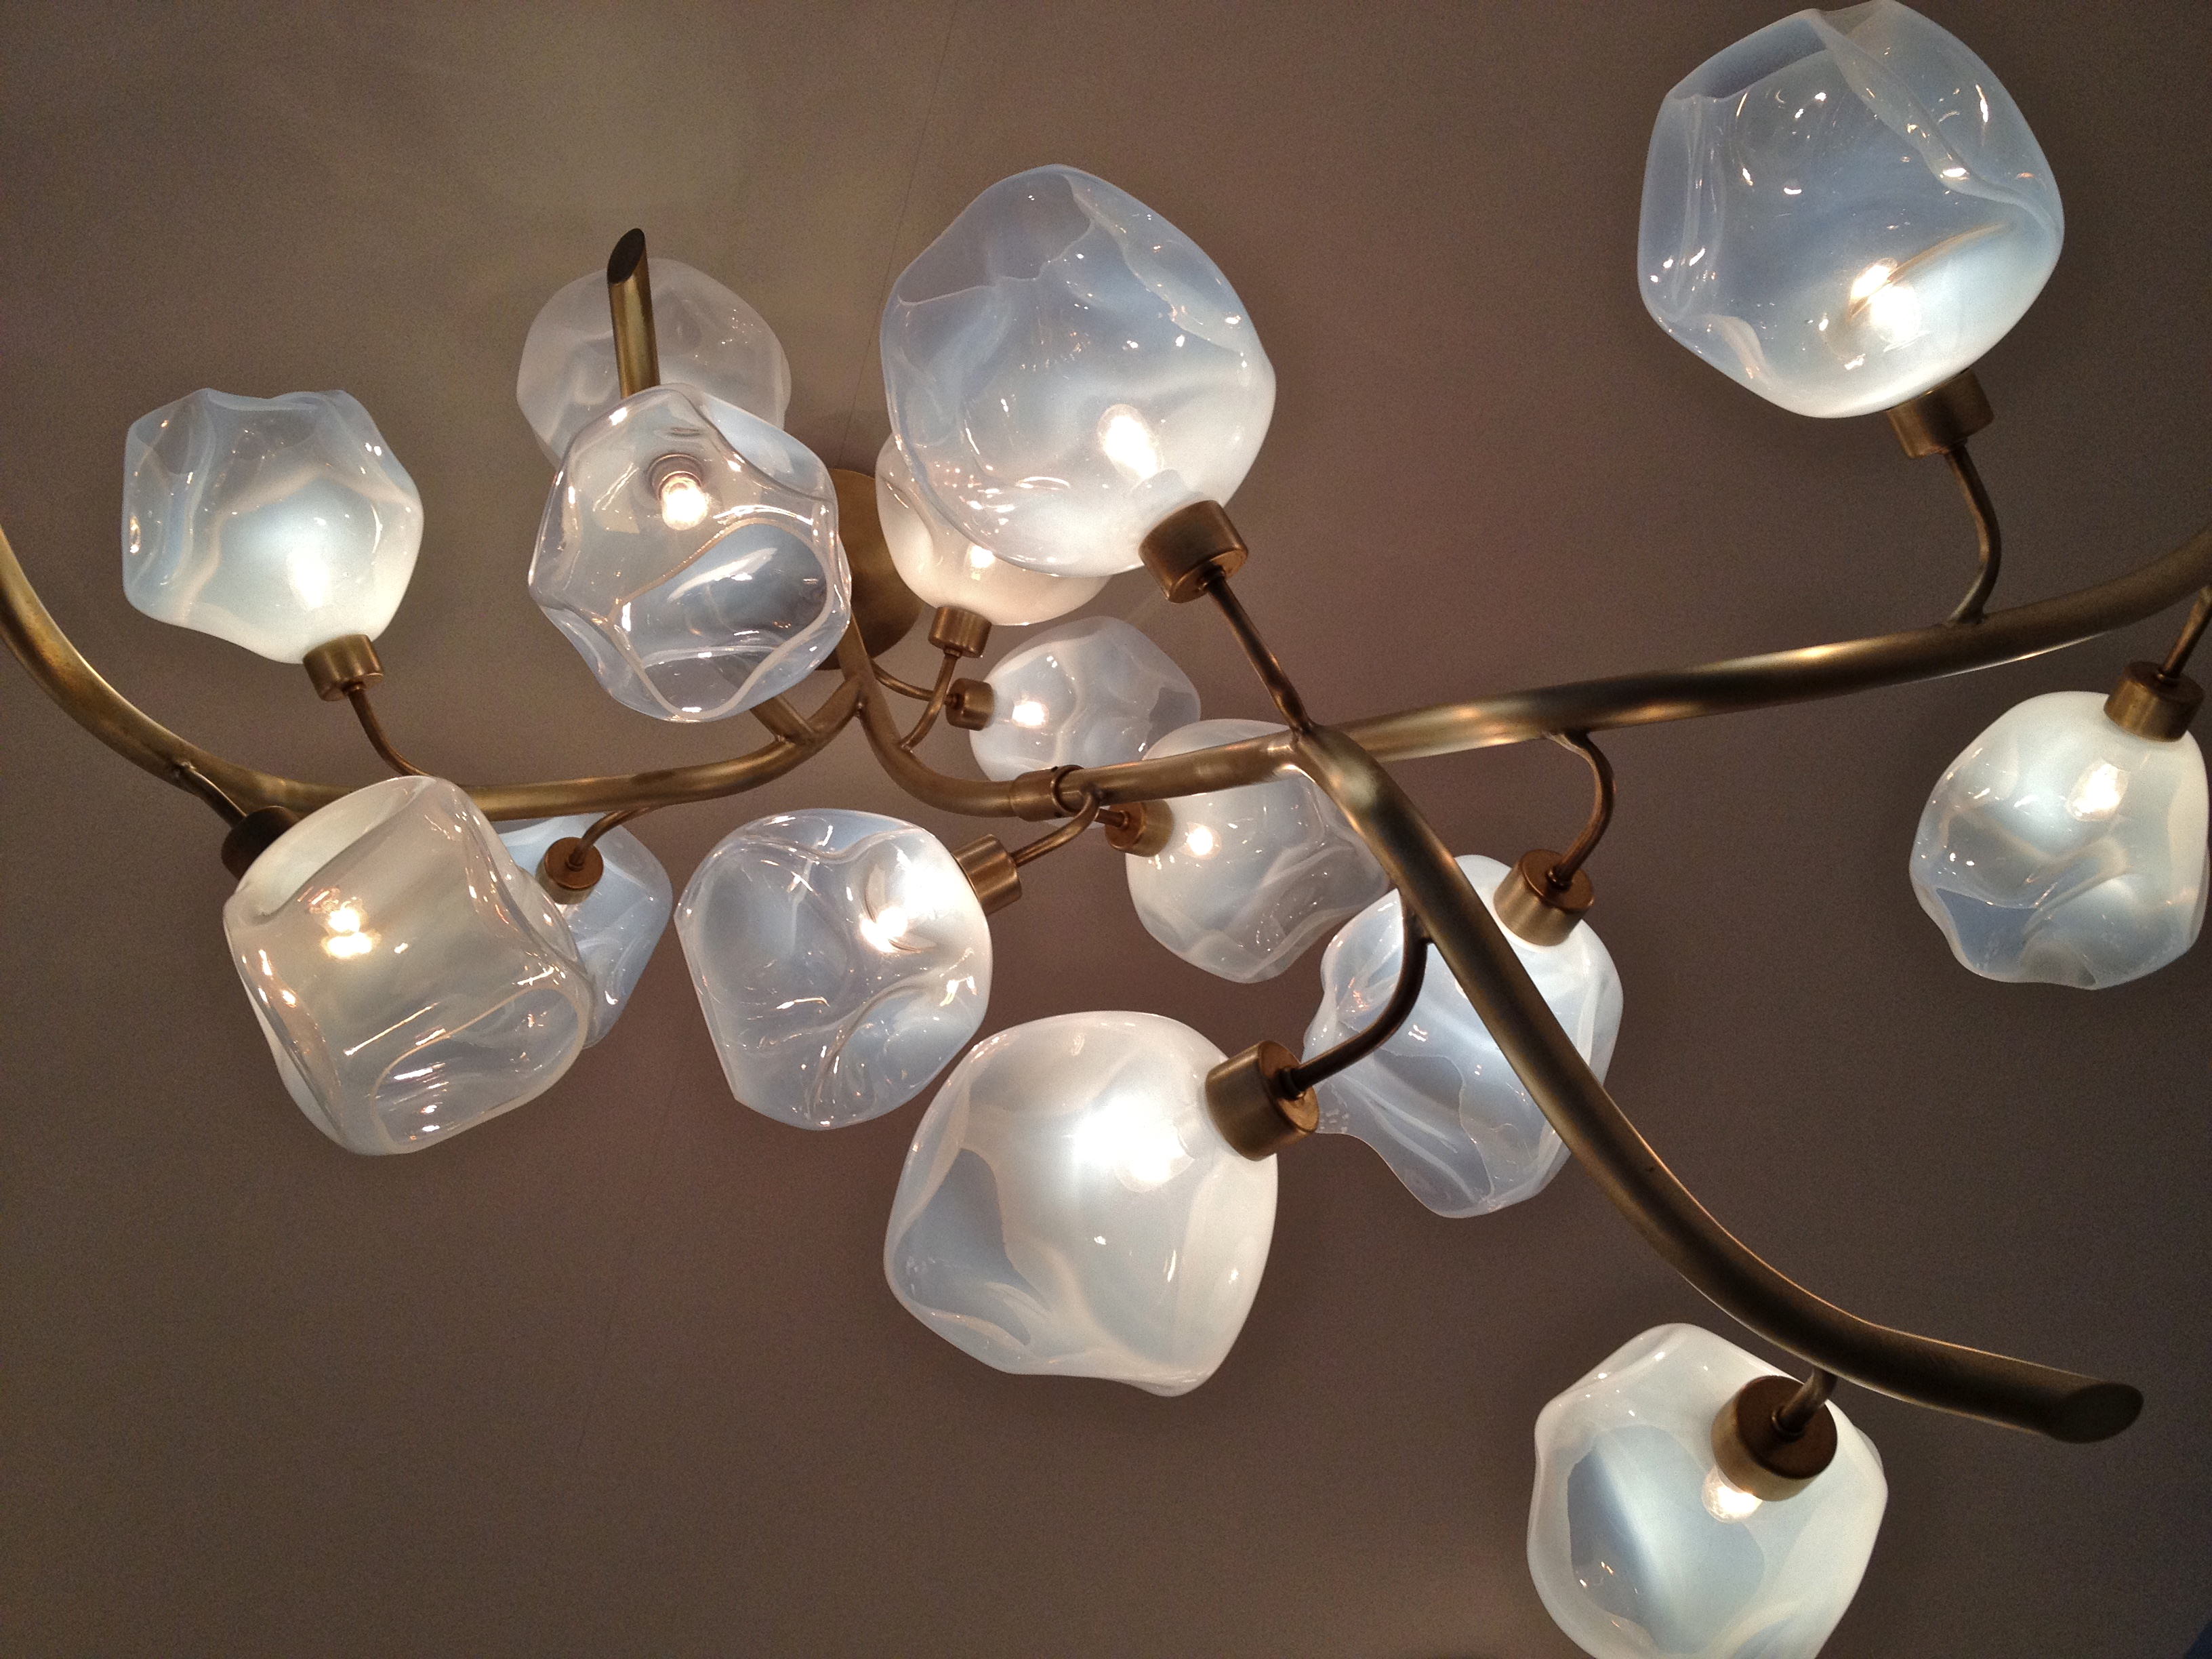 Ceiling lamp made of hand-blown glass balls